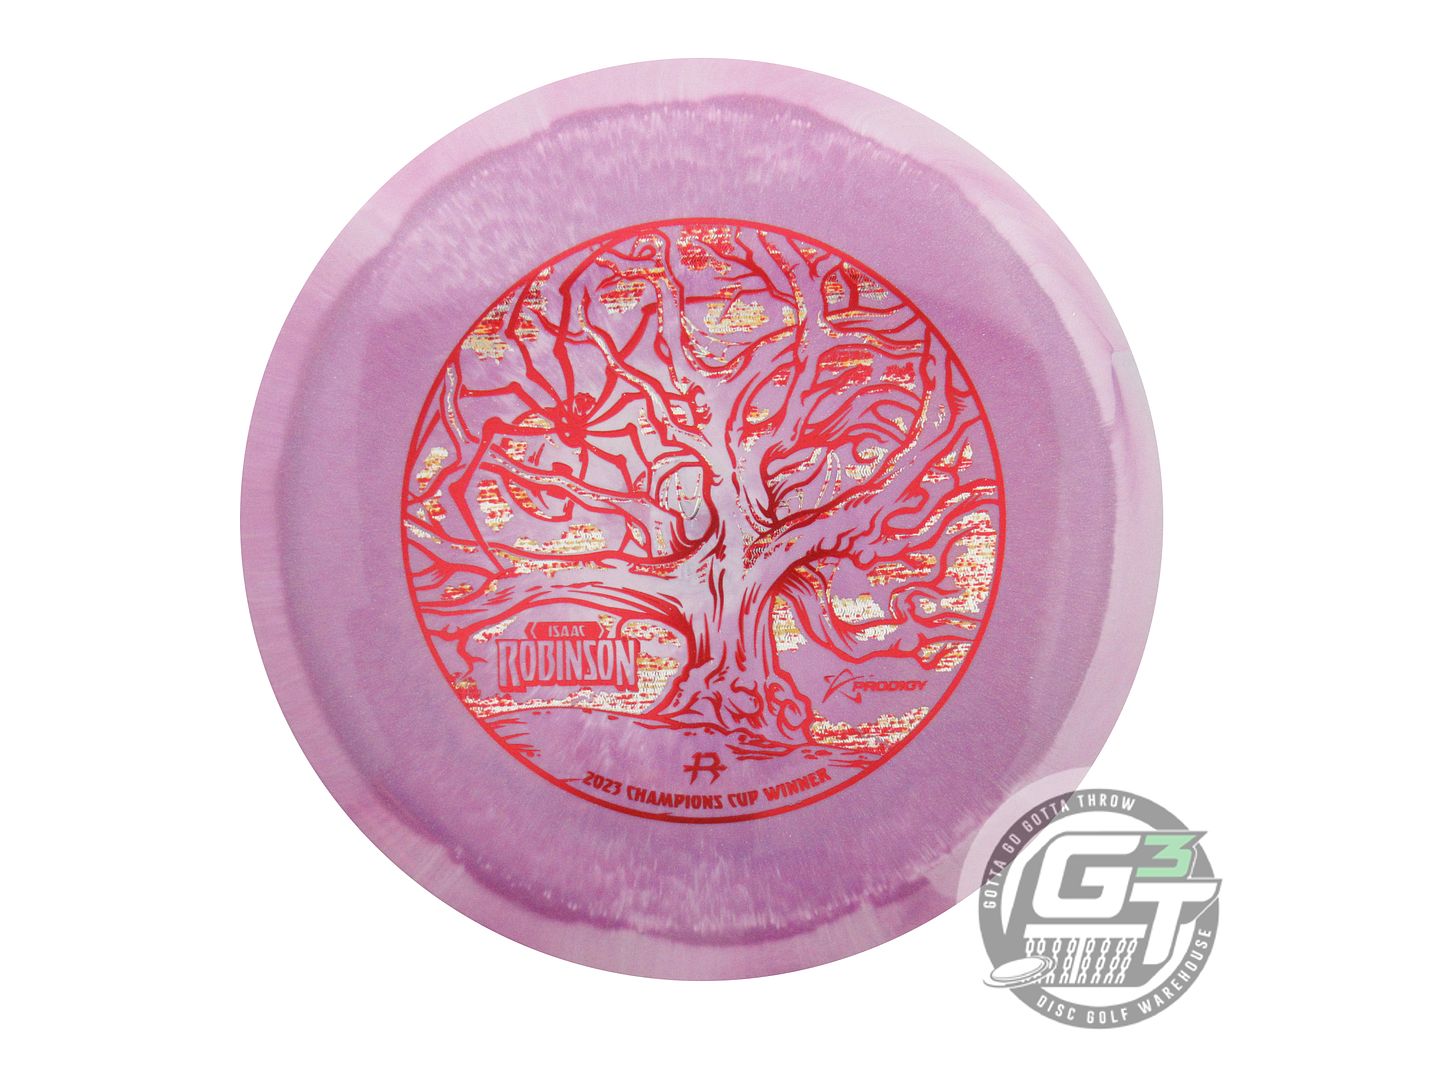 Prodigy Limited Edition Isaac Robinson Weaver Stamp Glimmer 500 Spectrum F3 Fairway Driver Golf Disc (Individually Listed)